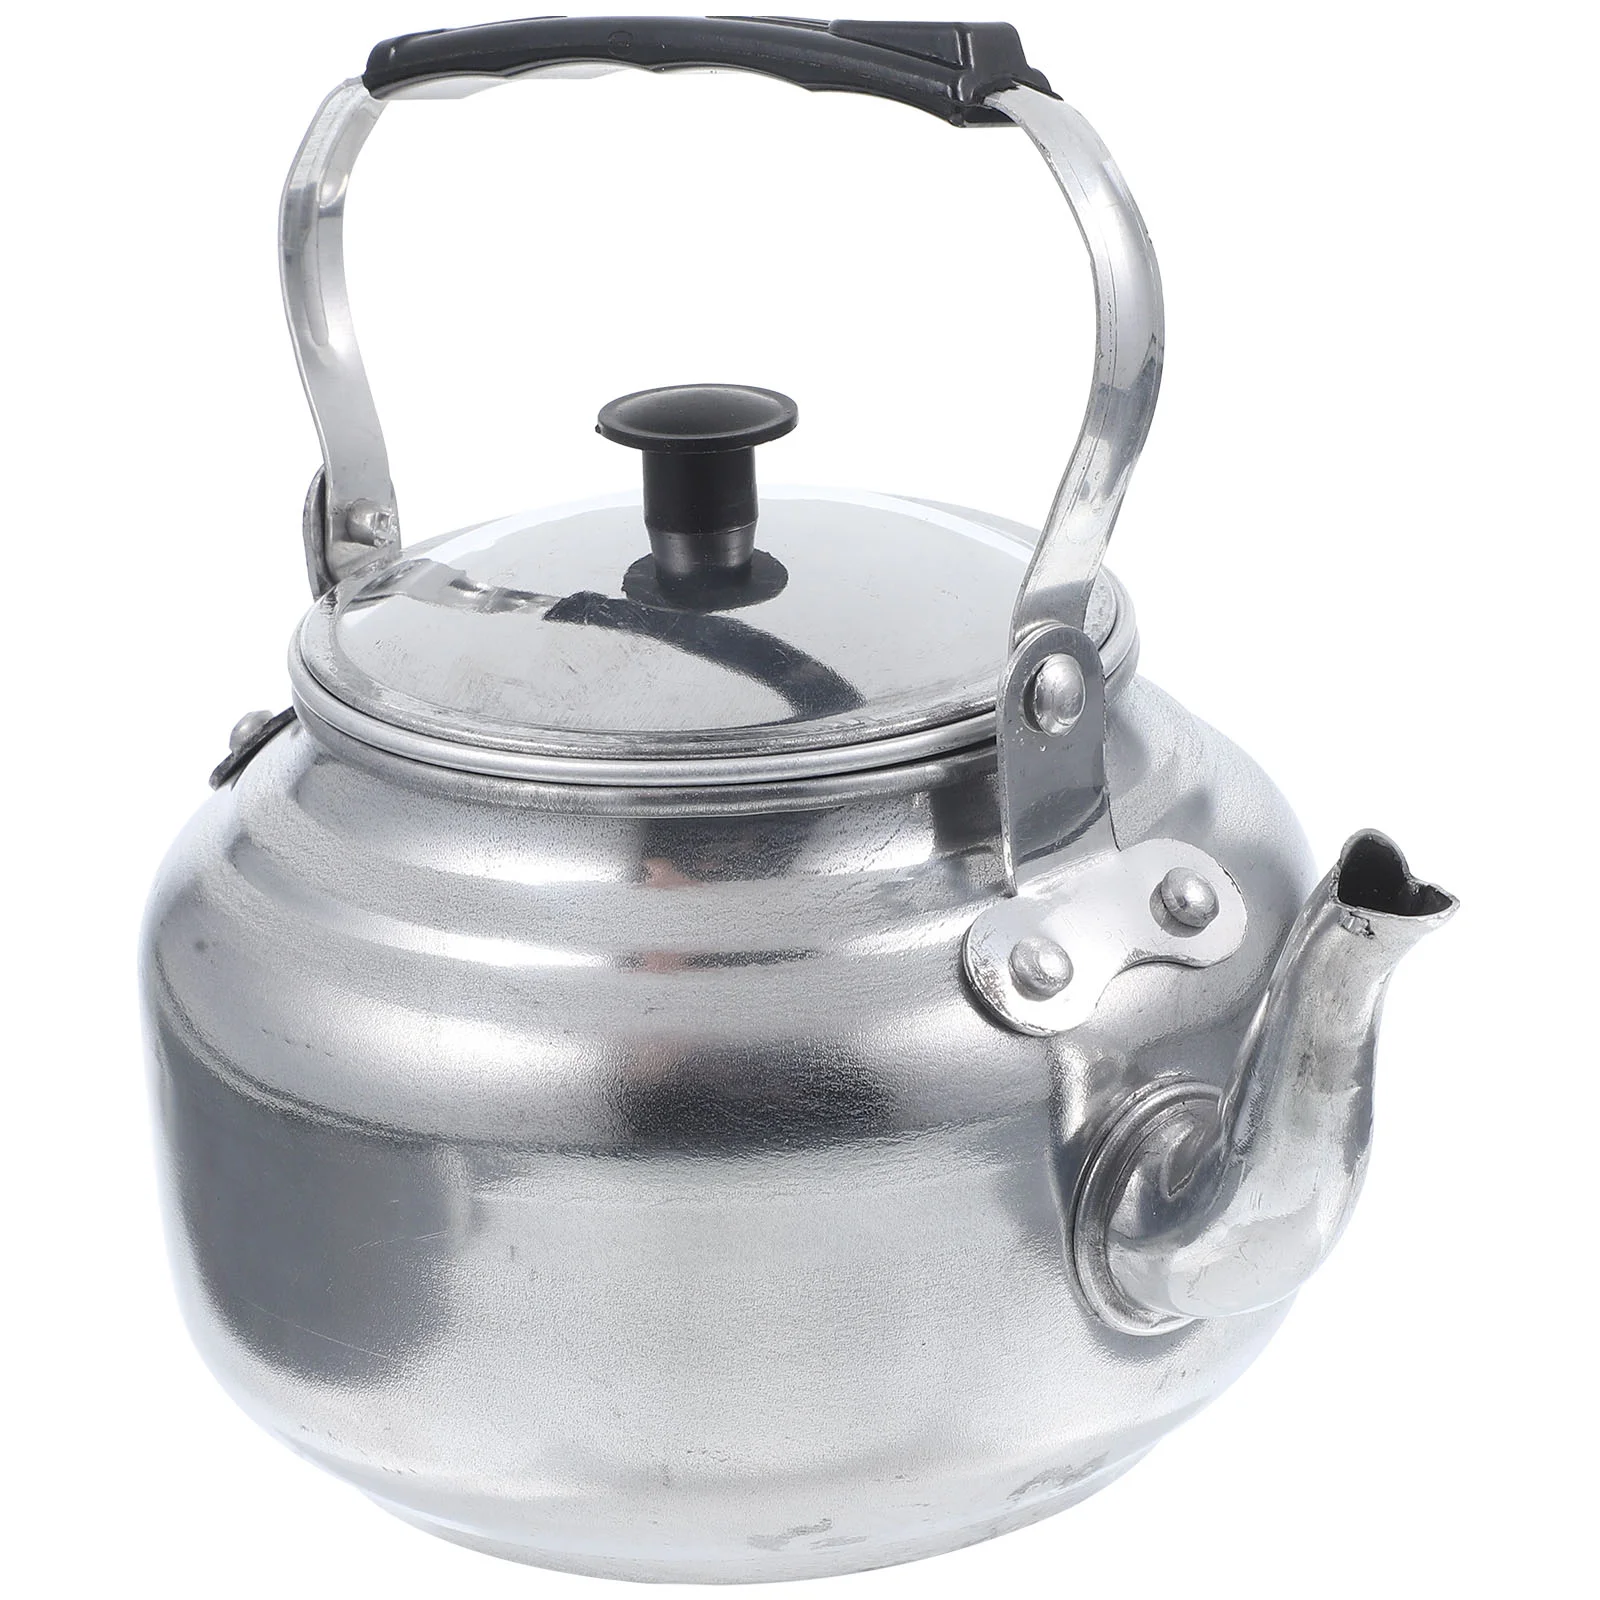 Metal Water Jug Whistling Pot Cover Water Boiling Pot Whistling Water Kettle Aluminum Alloy Camping Kettle